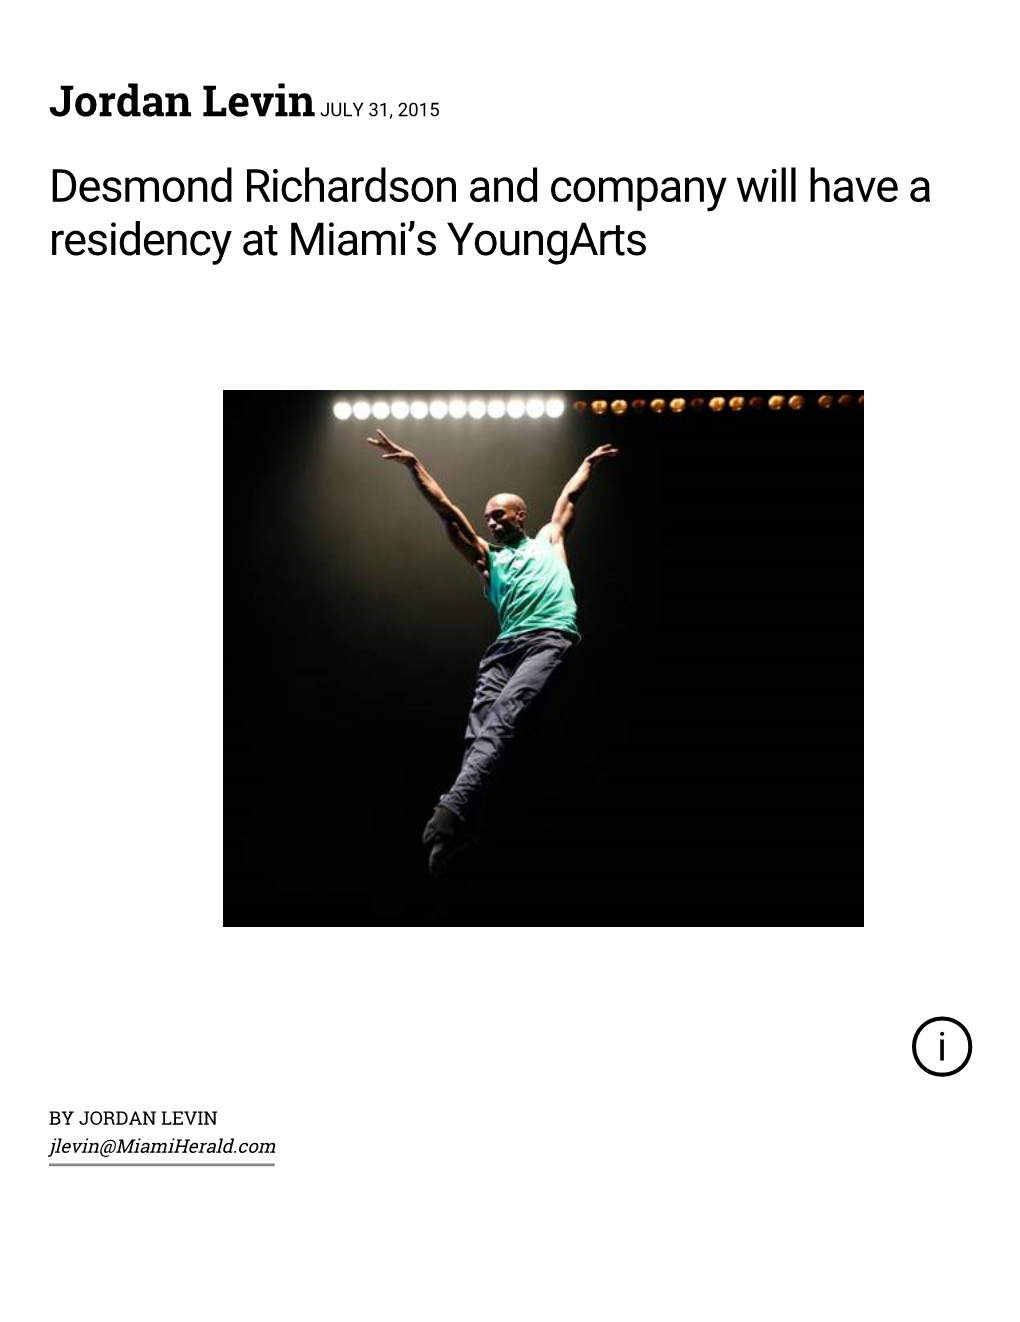 Desmond Richardson and Company Will Have a Residency at Miami's